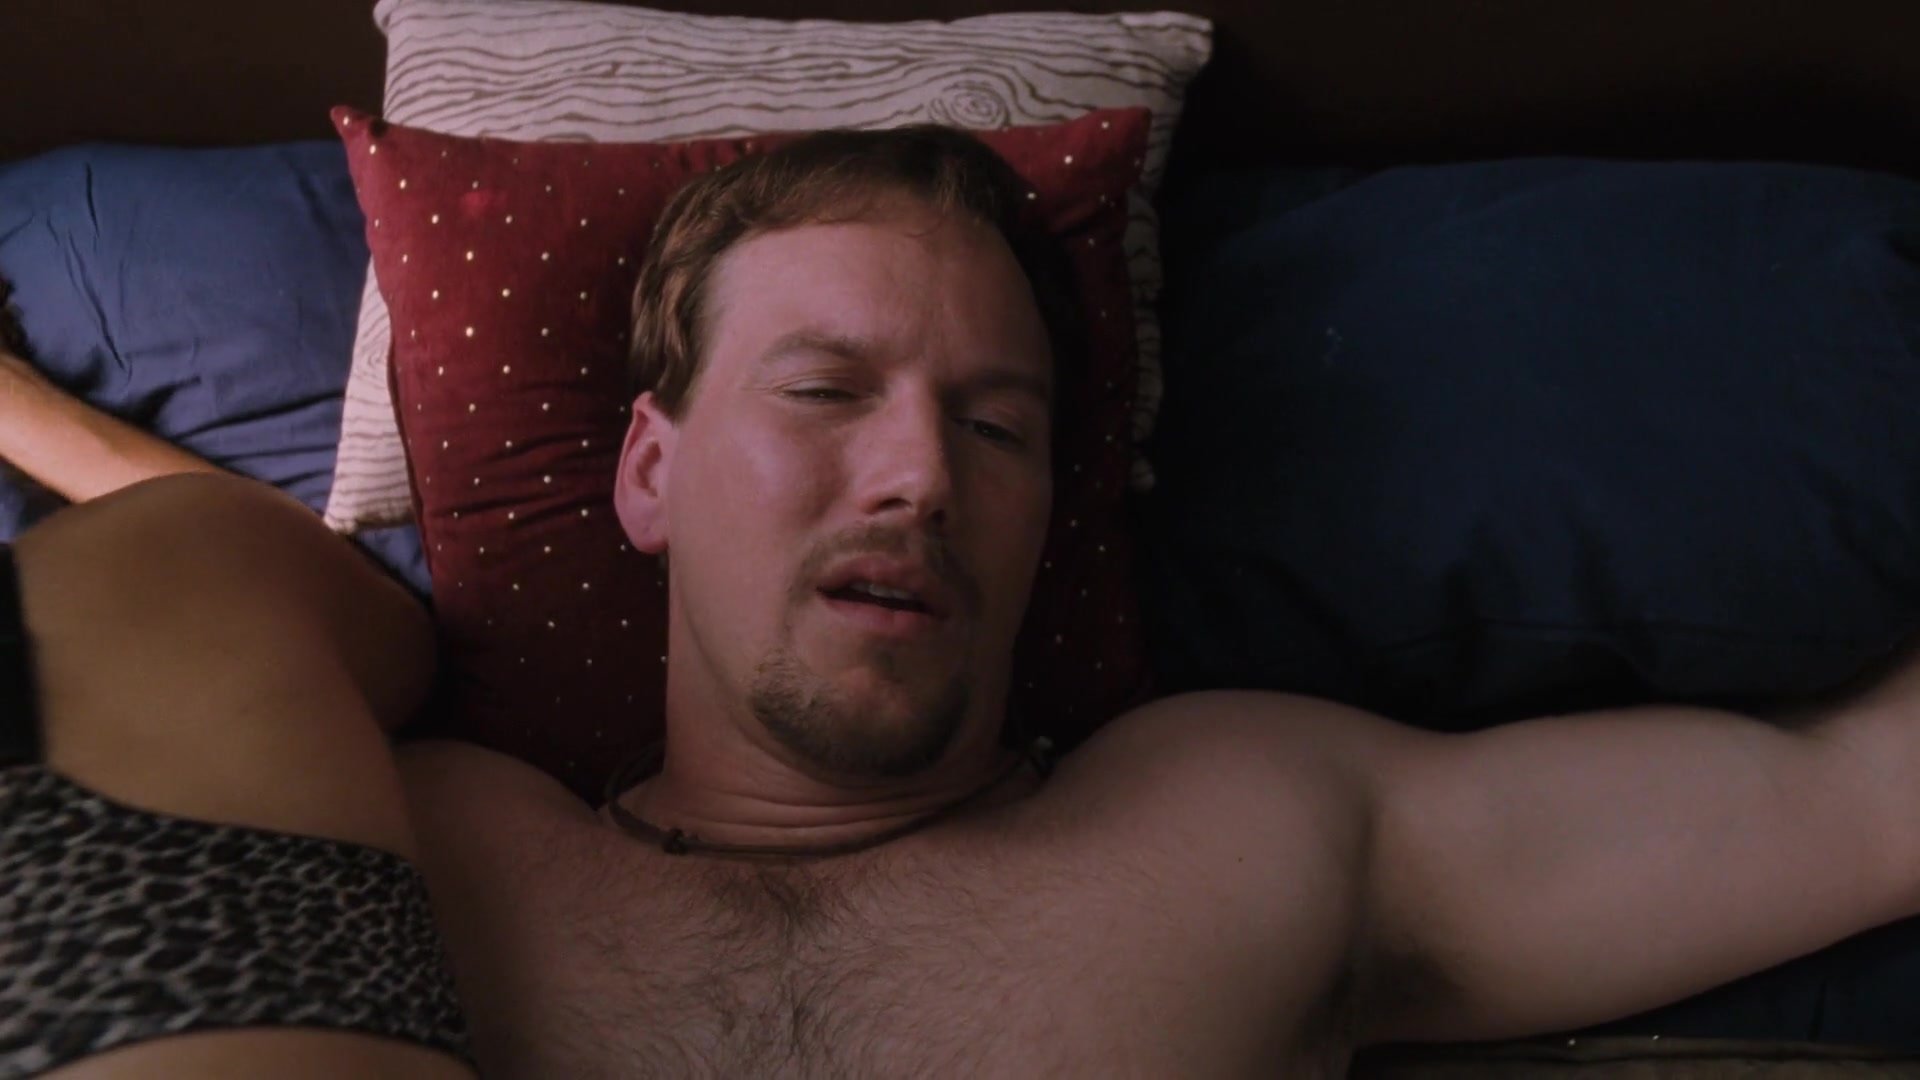 Patrick Wilson tied to bed